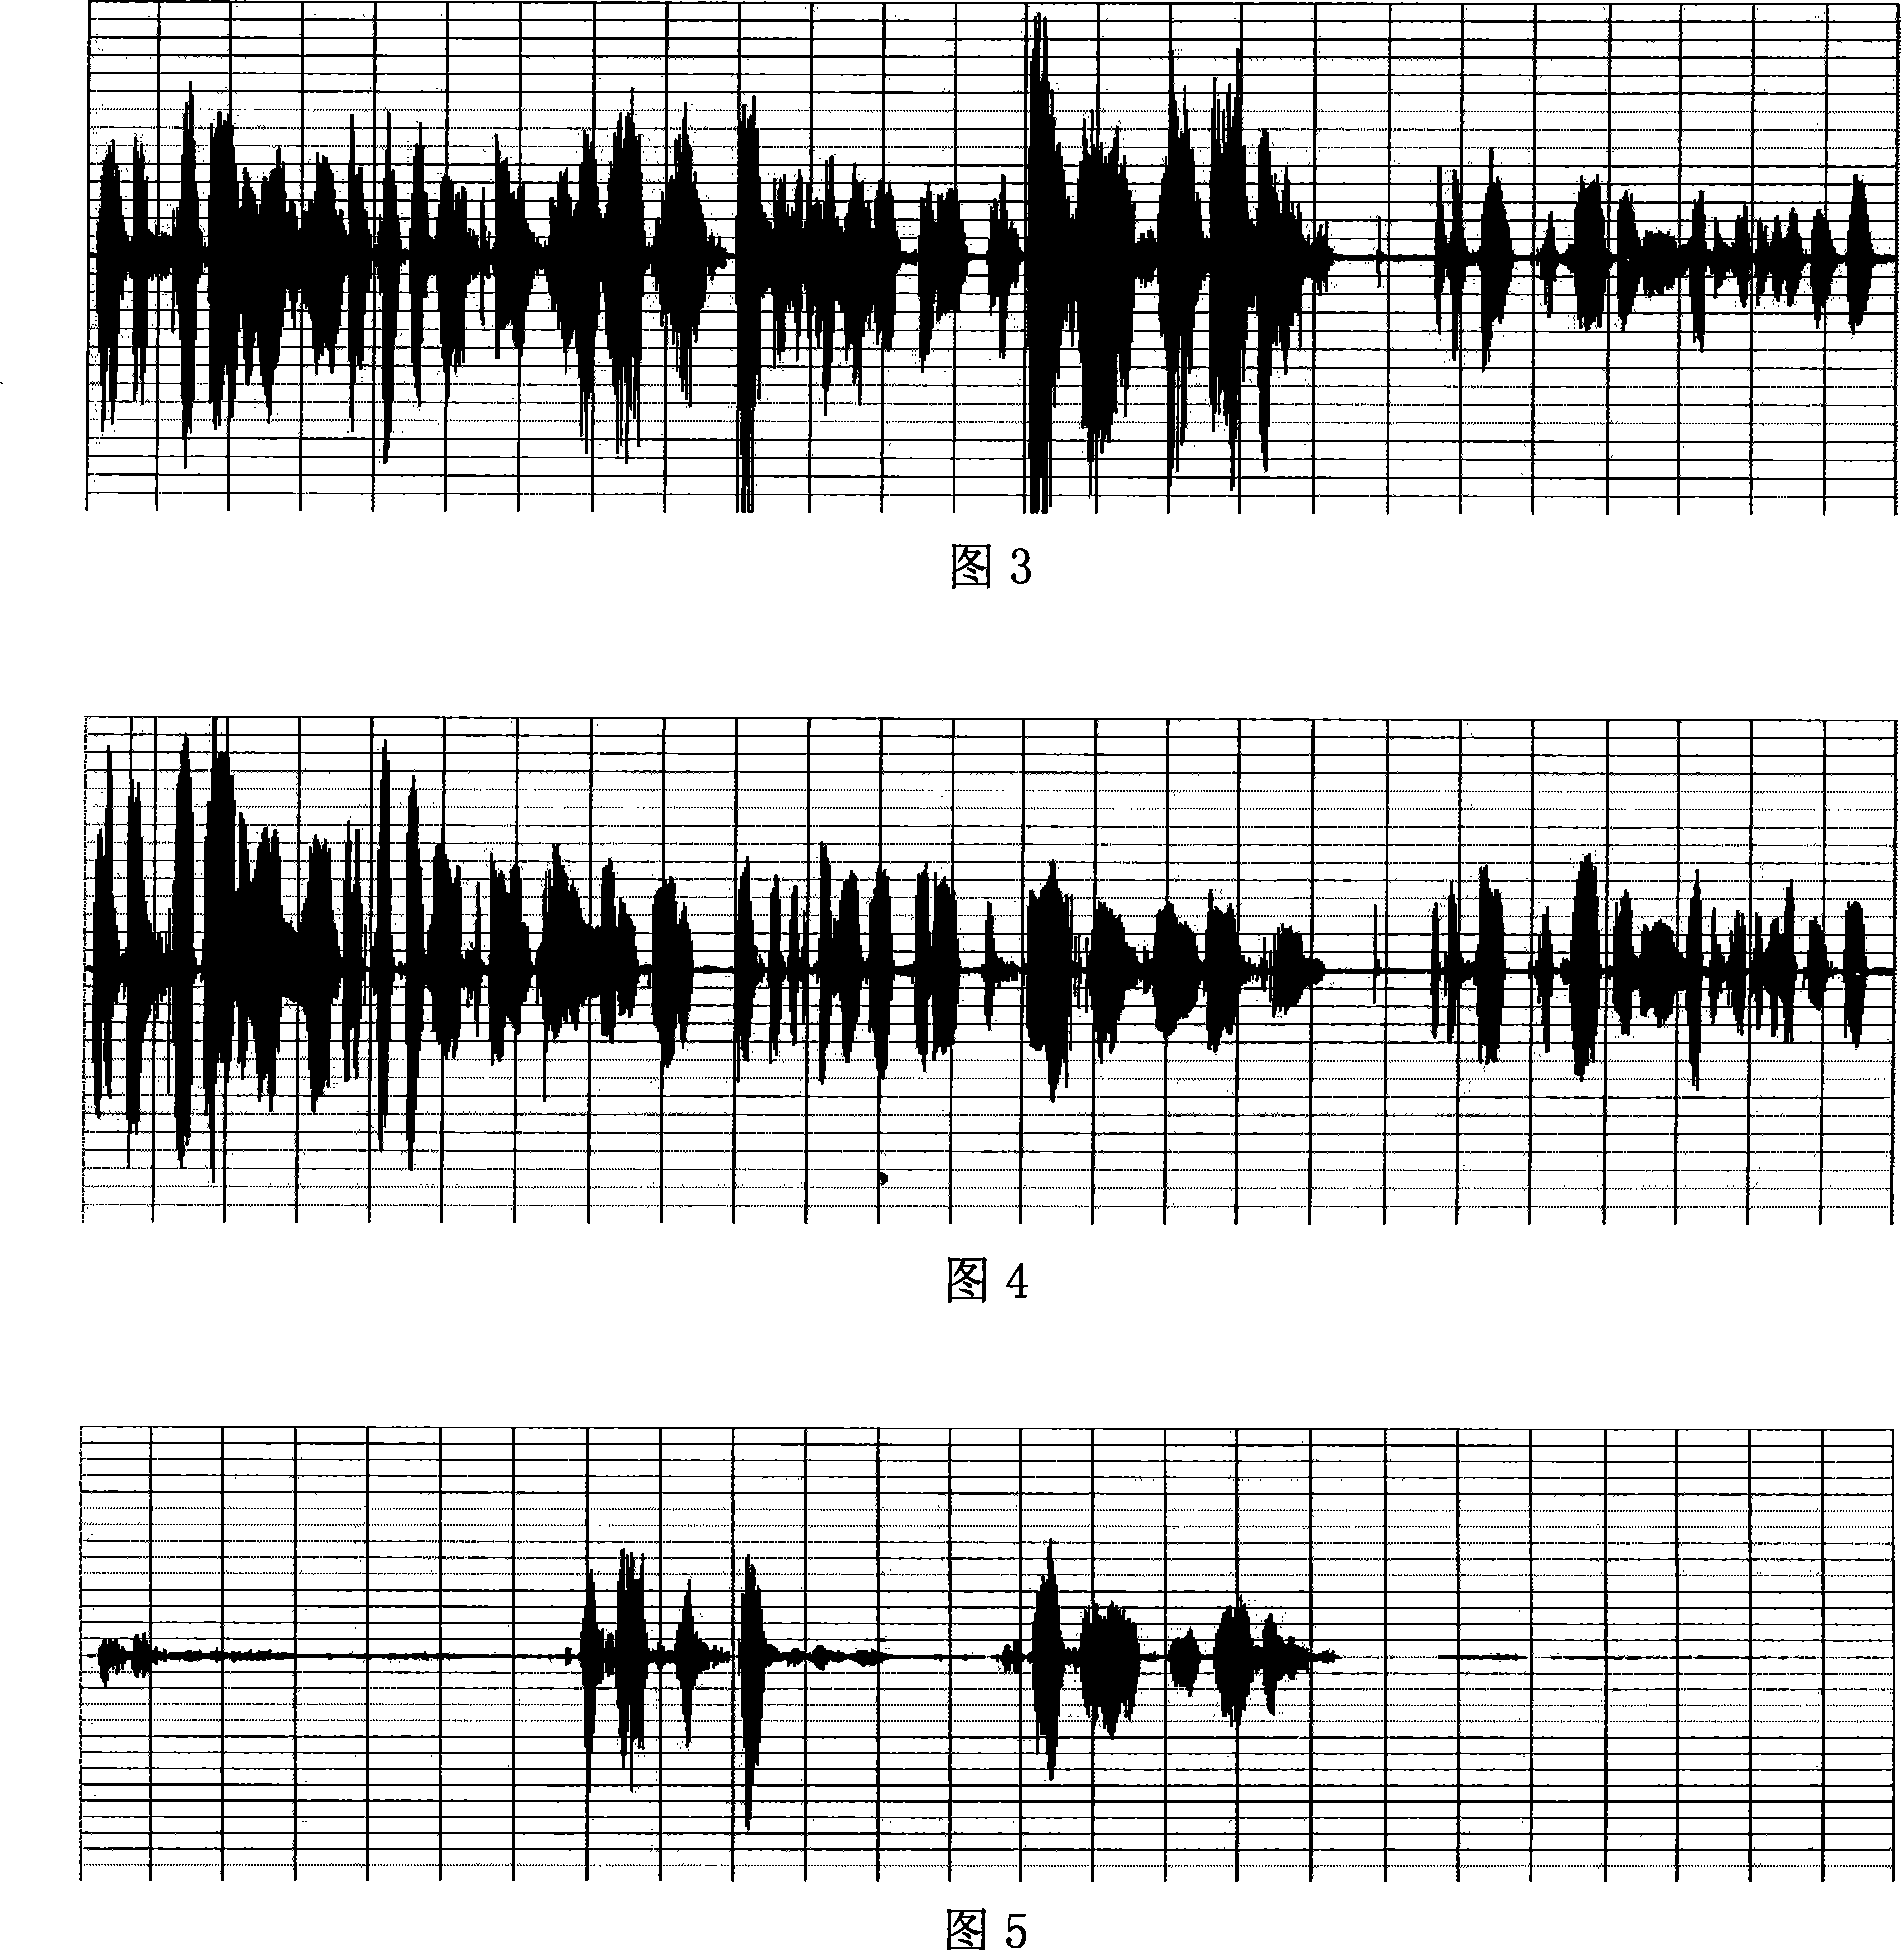 System and method for improving audio speech quality